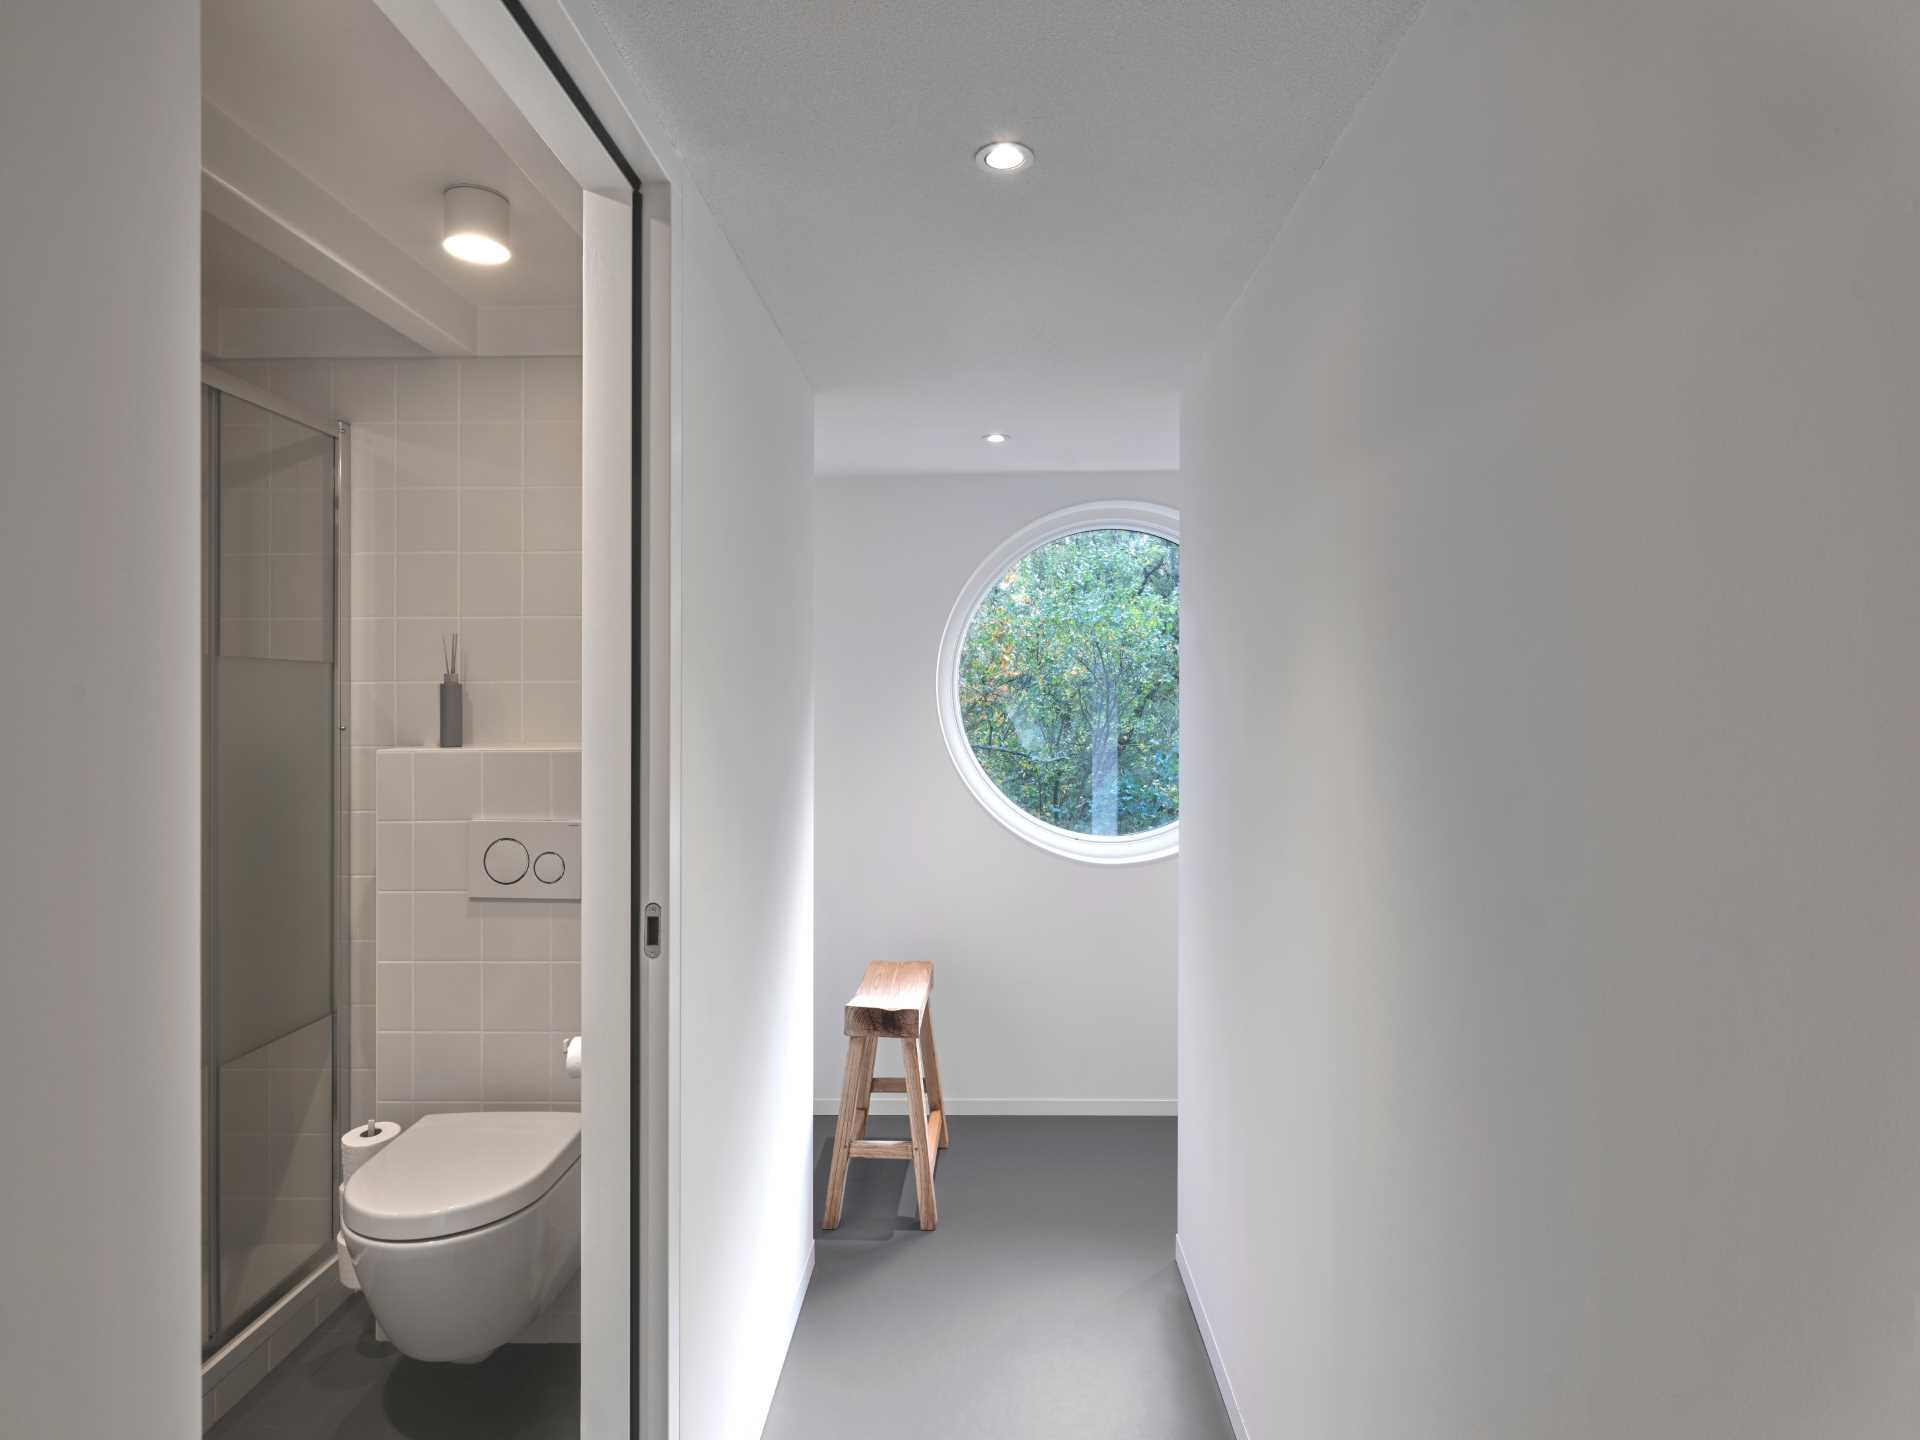 The bathroom in a small elevated cabin.